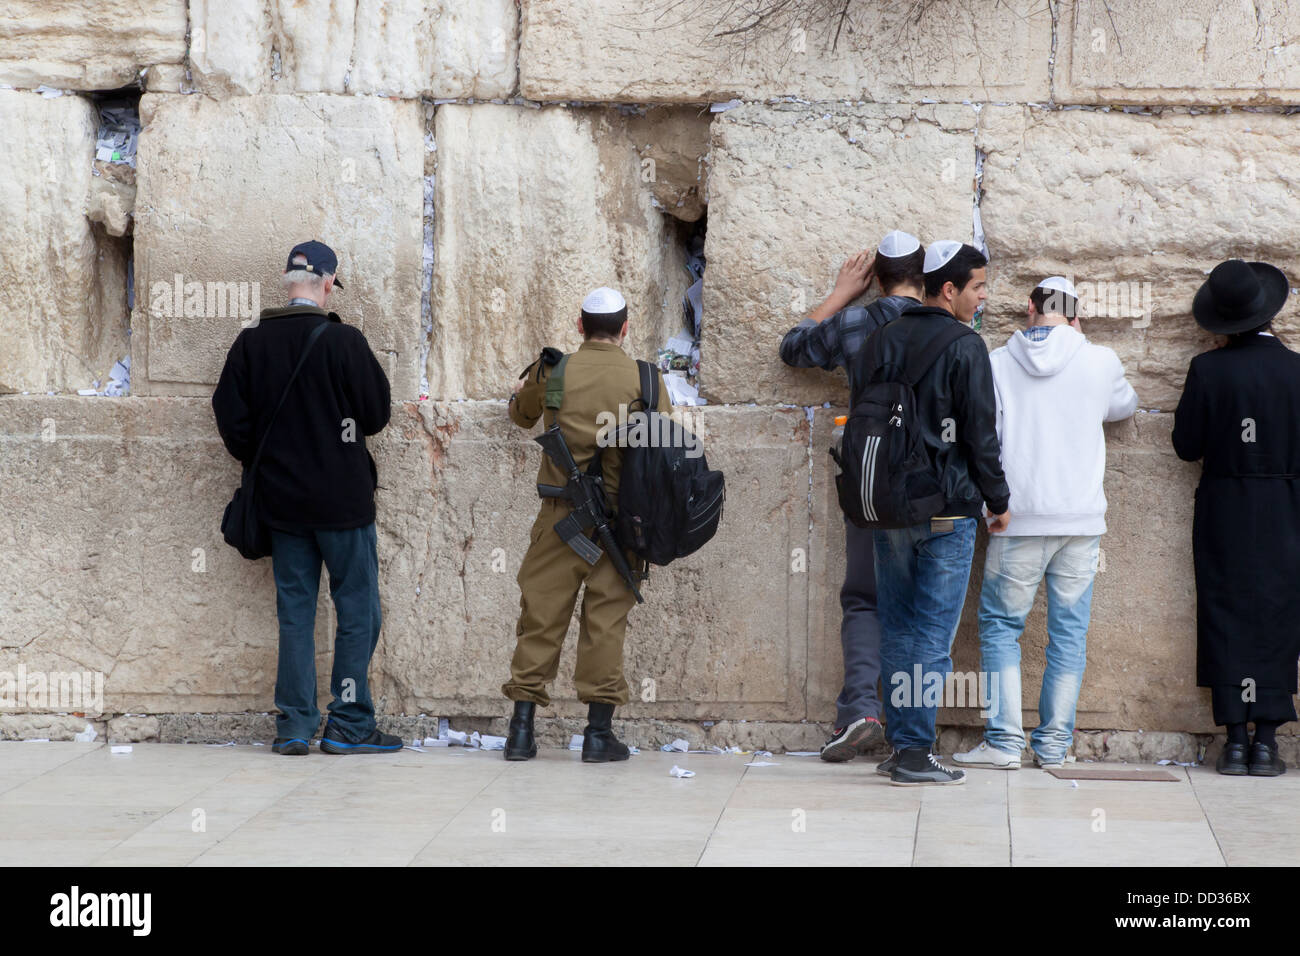 Wailing wall, sacred site for Jews and Christians, Jerusalem, Israel, CIRCA February 17, 2013.  Where men are praying. Stock Photo